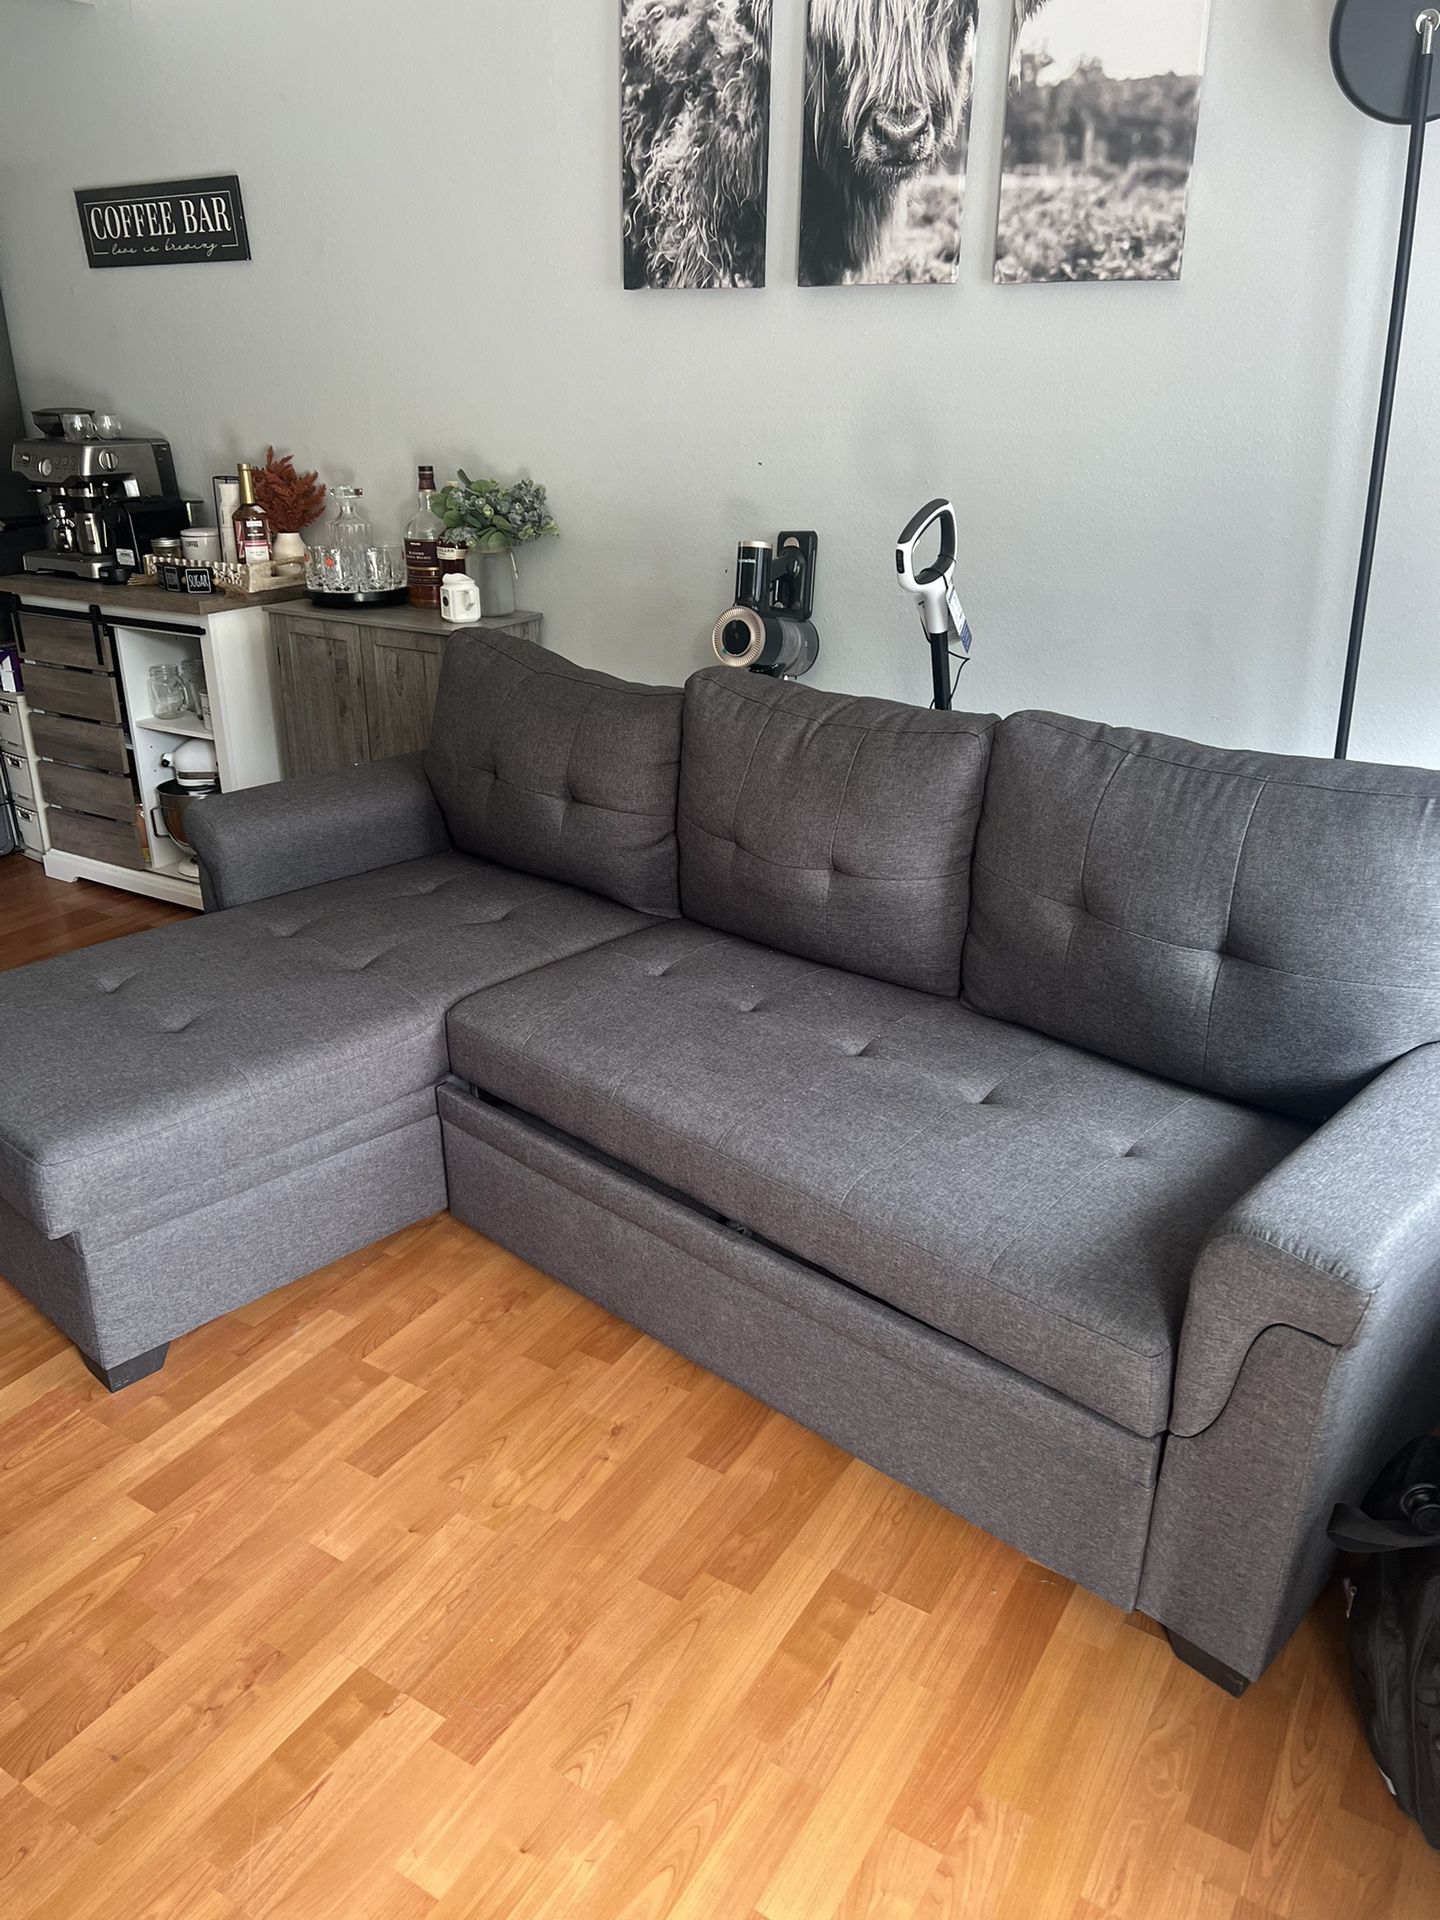 Reversible Sleeper Sectional With Storage Couch 